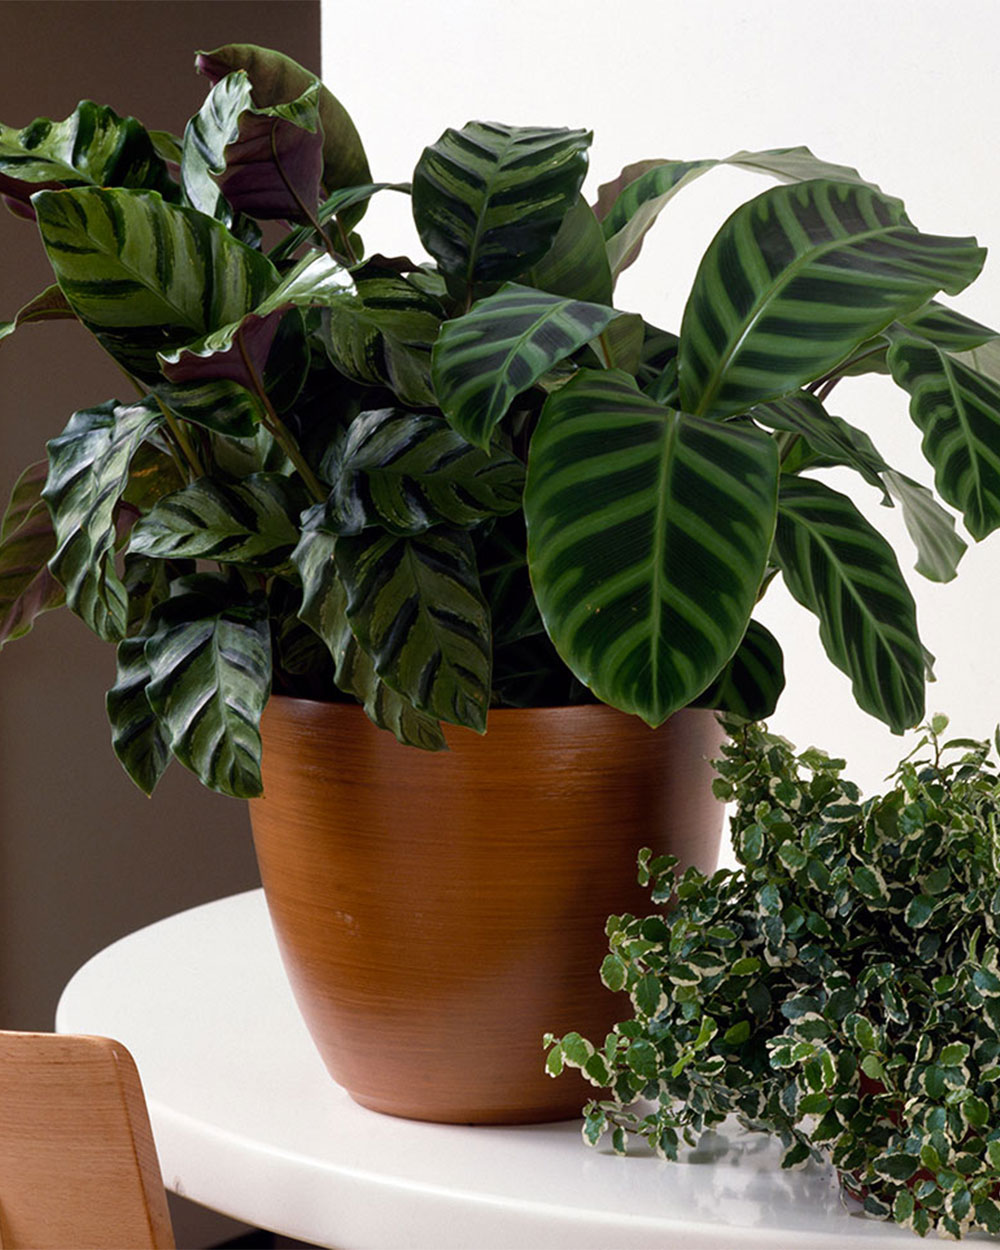 10 interesting vessels for your indoor plants - Fashion Quarterly